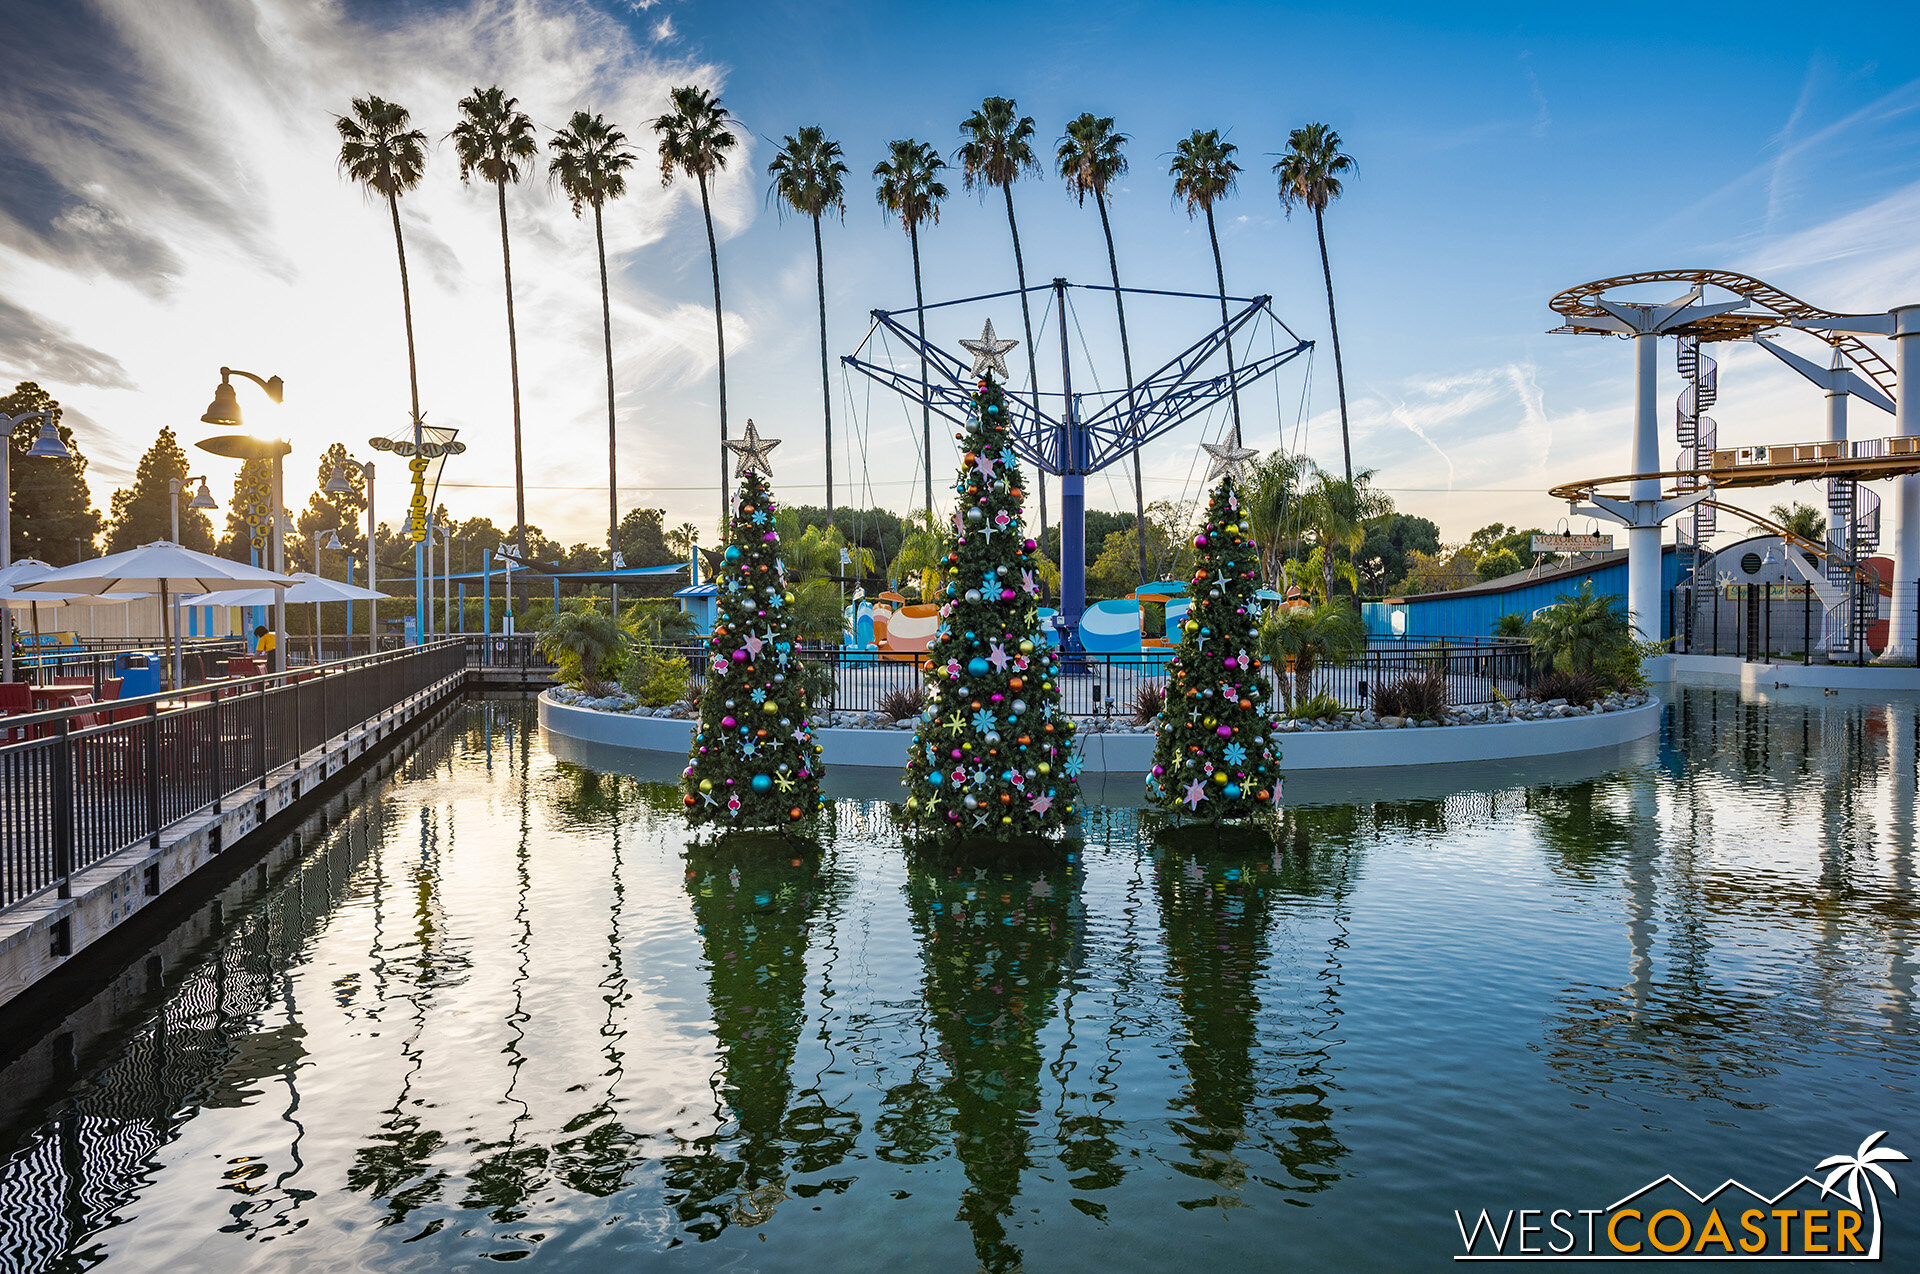  The “floating” Christmas tree around Surfside Gliders and Pacific Scrambler are still a favorite and oh so scenic! 